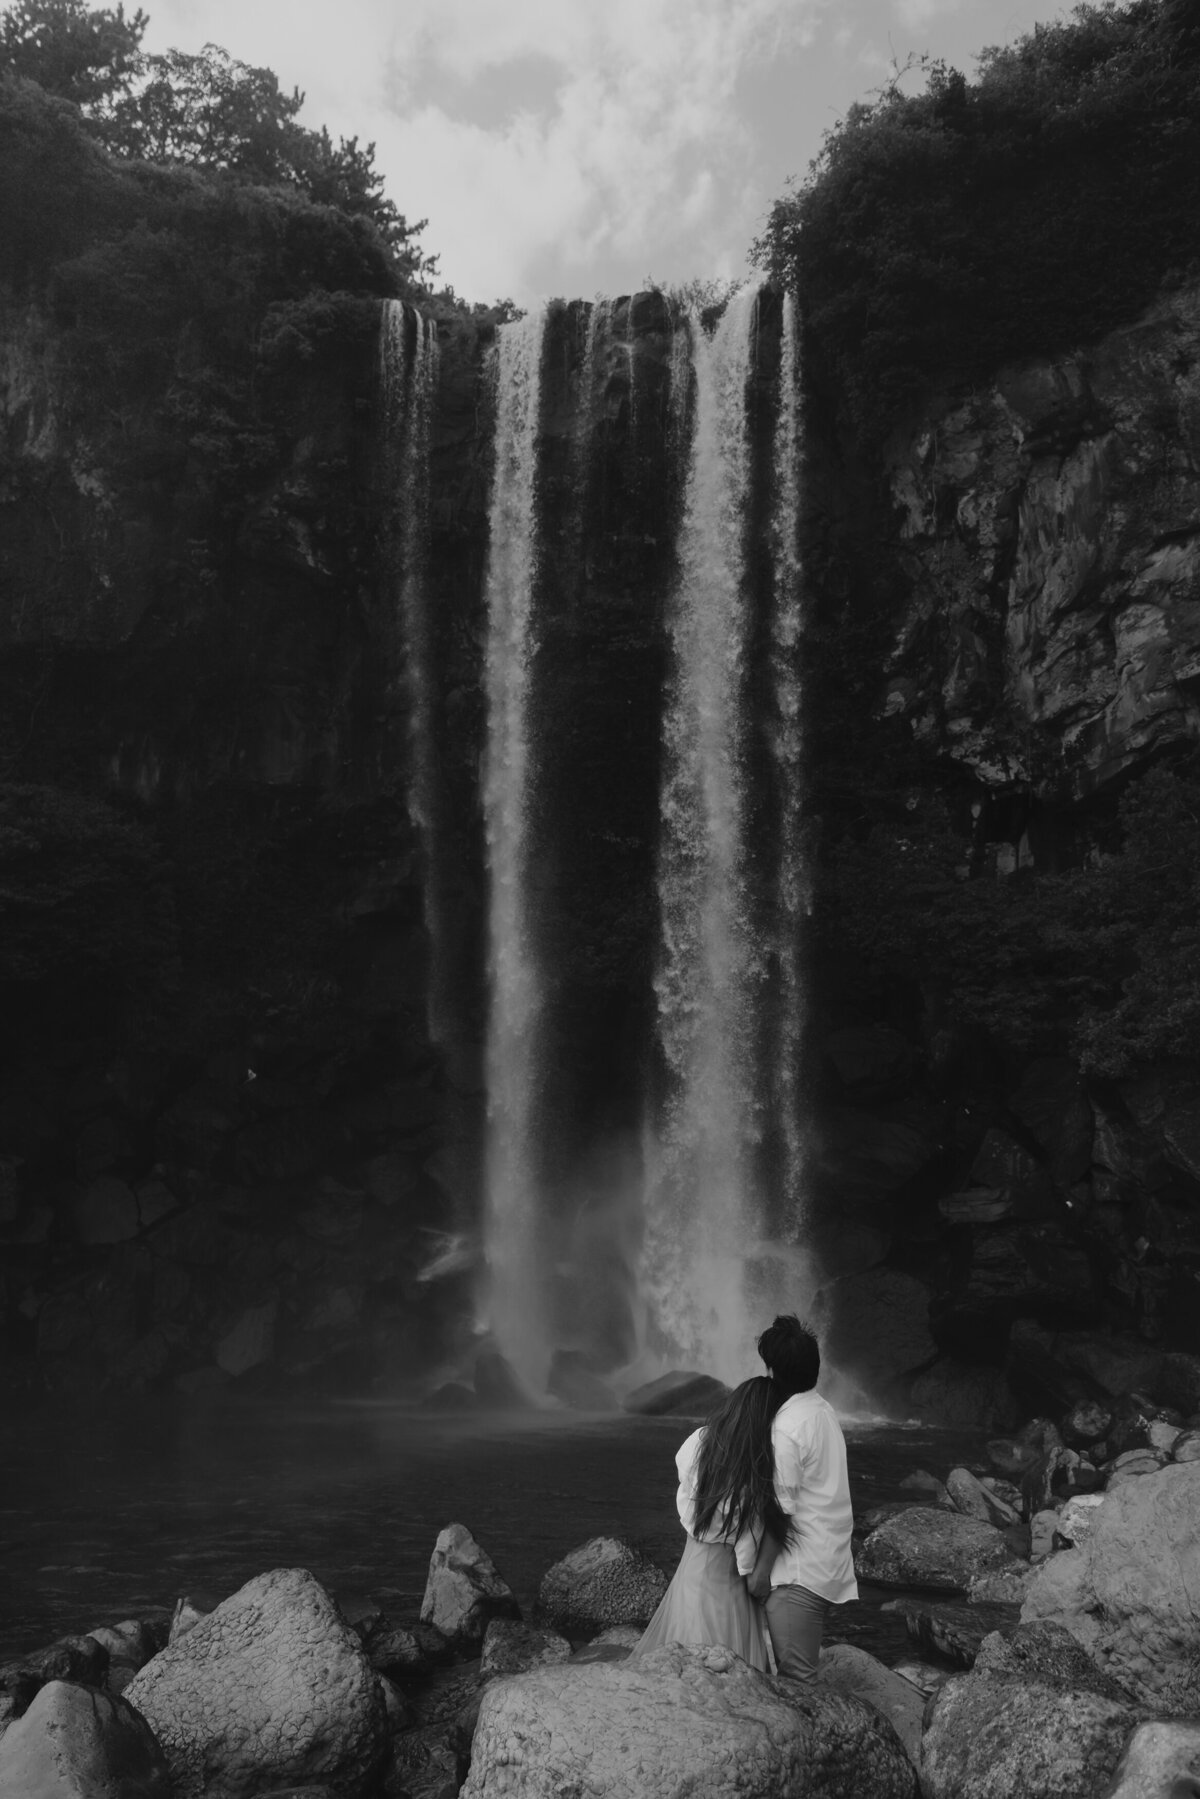 the bride leaning her head to the groom's shoulder while facing the waterfall in jeju island